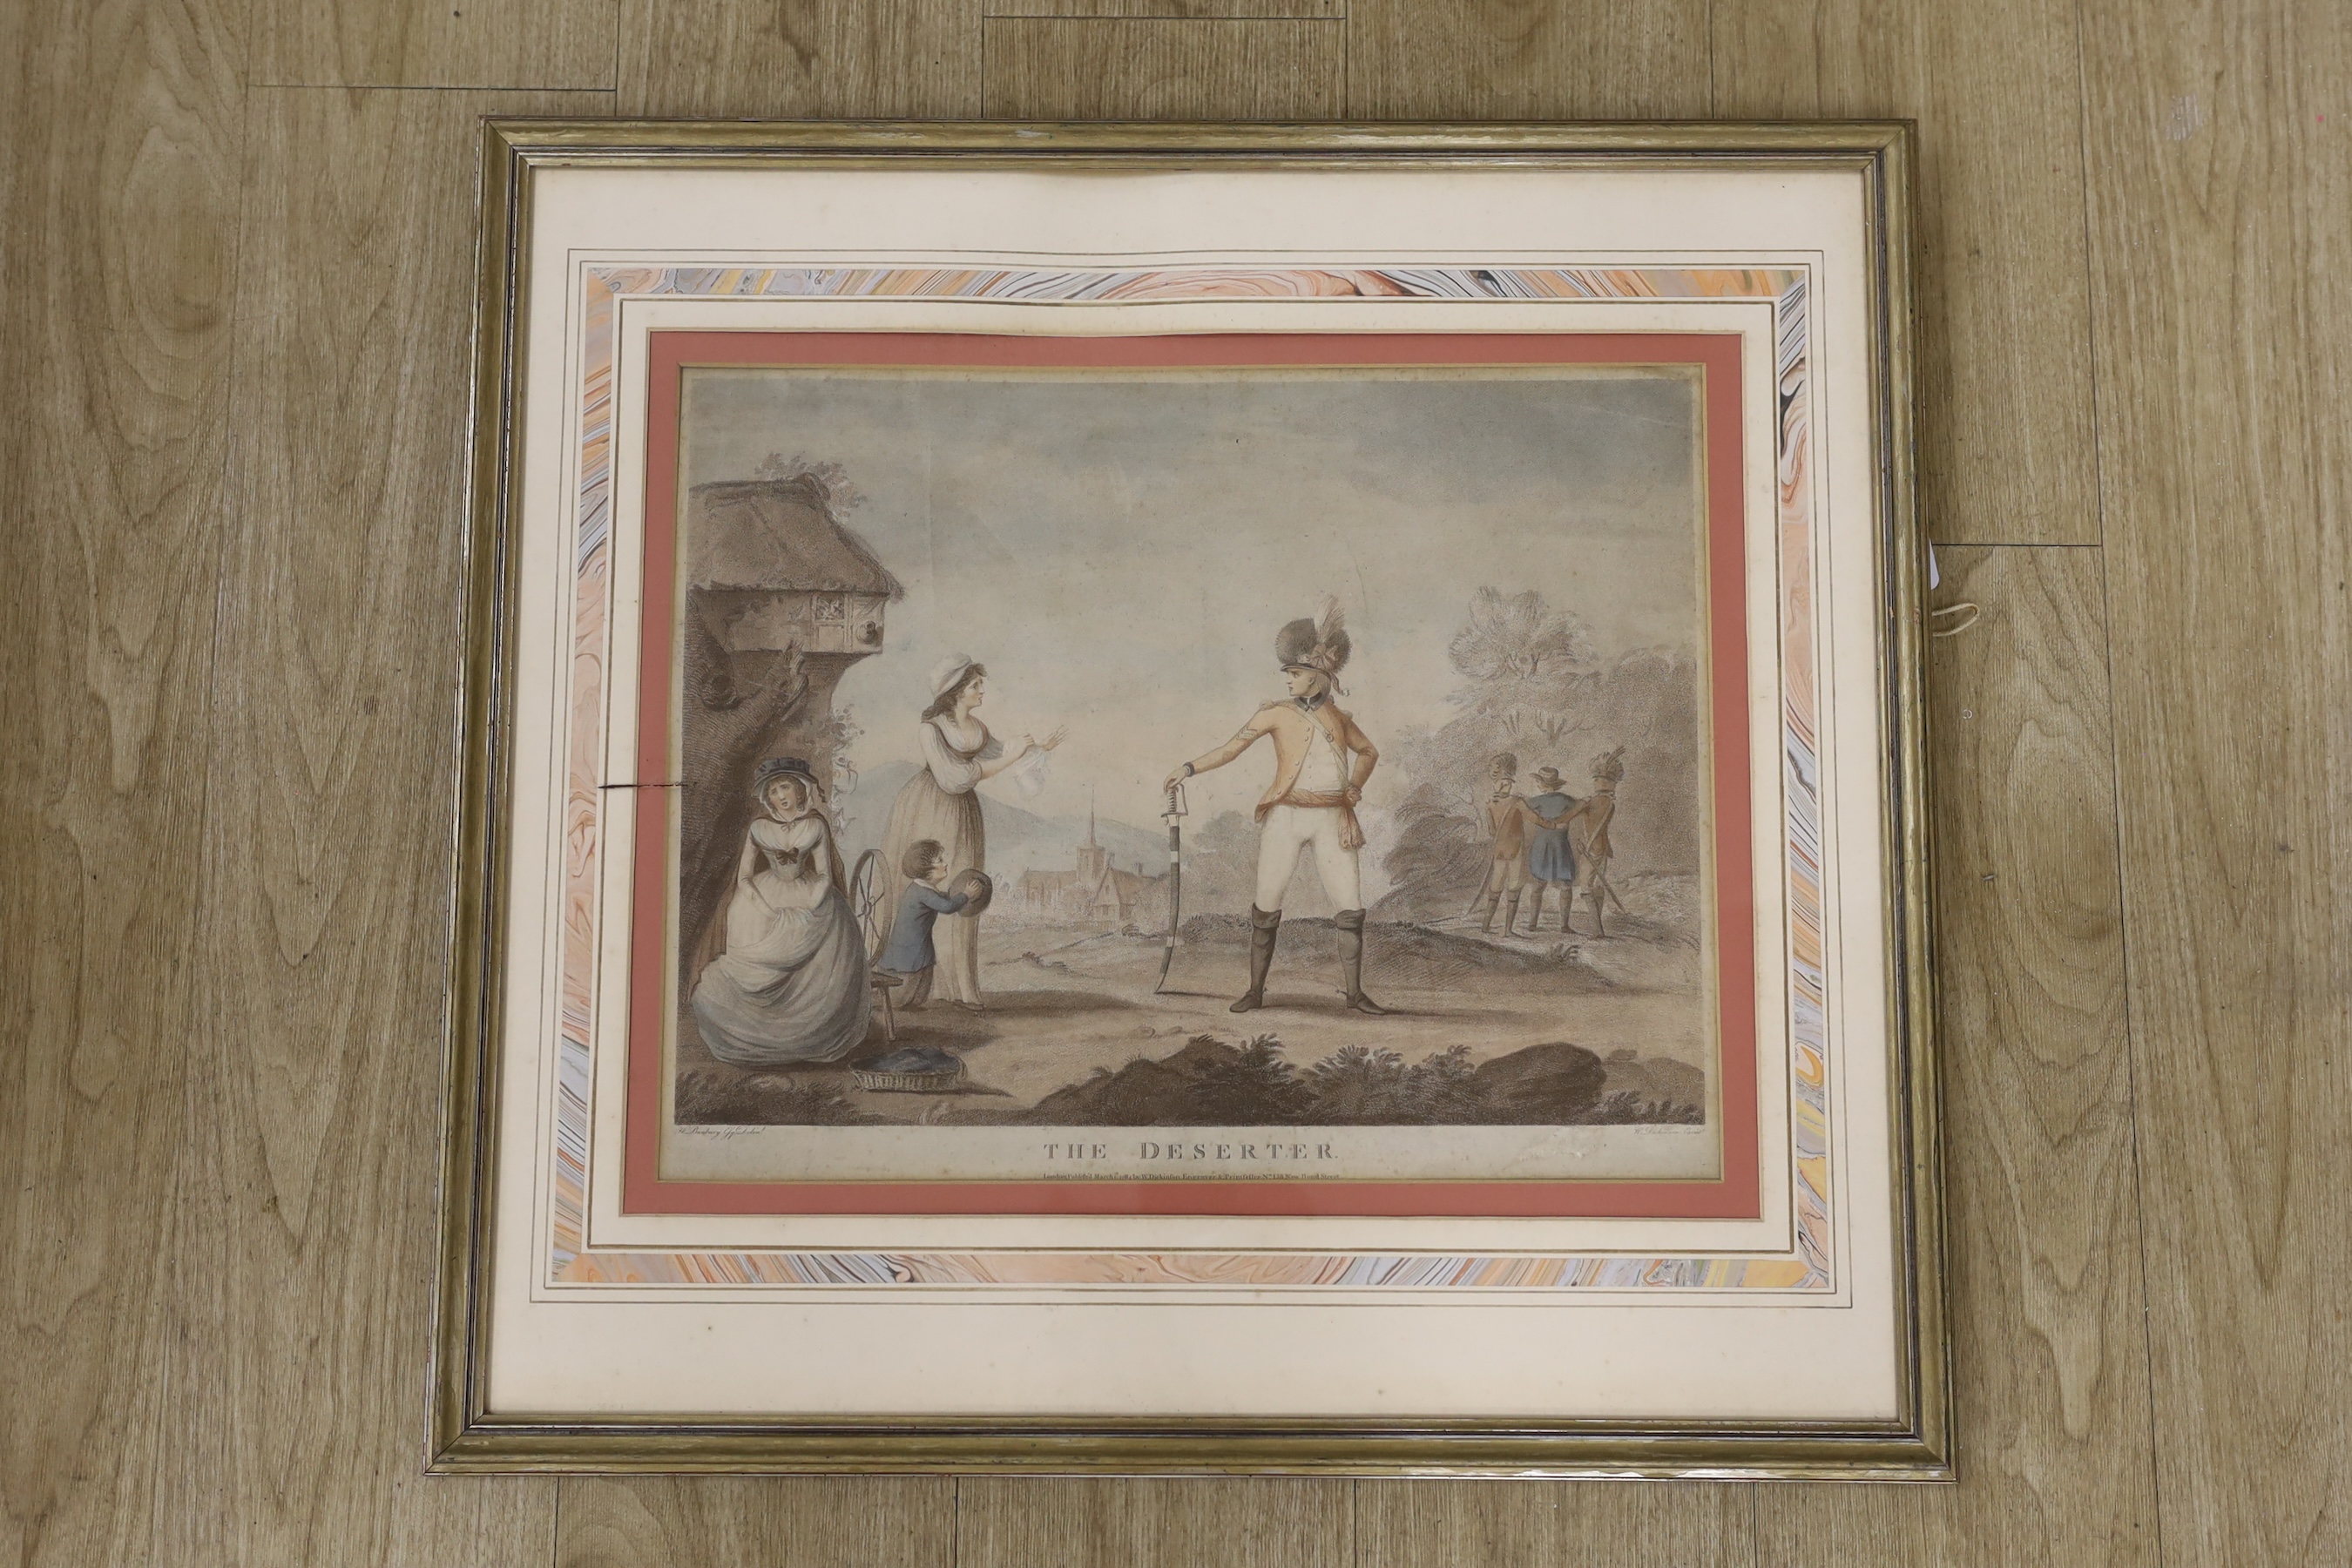 After Henry Bunbury (1750-1811), hand coloured engraving, 'The Deserter', publ. 1st March 1784 by W Dickinson, 38 x 48cm